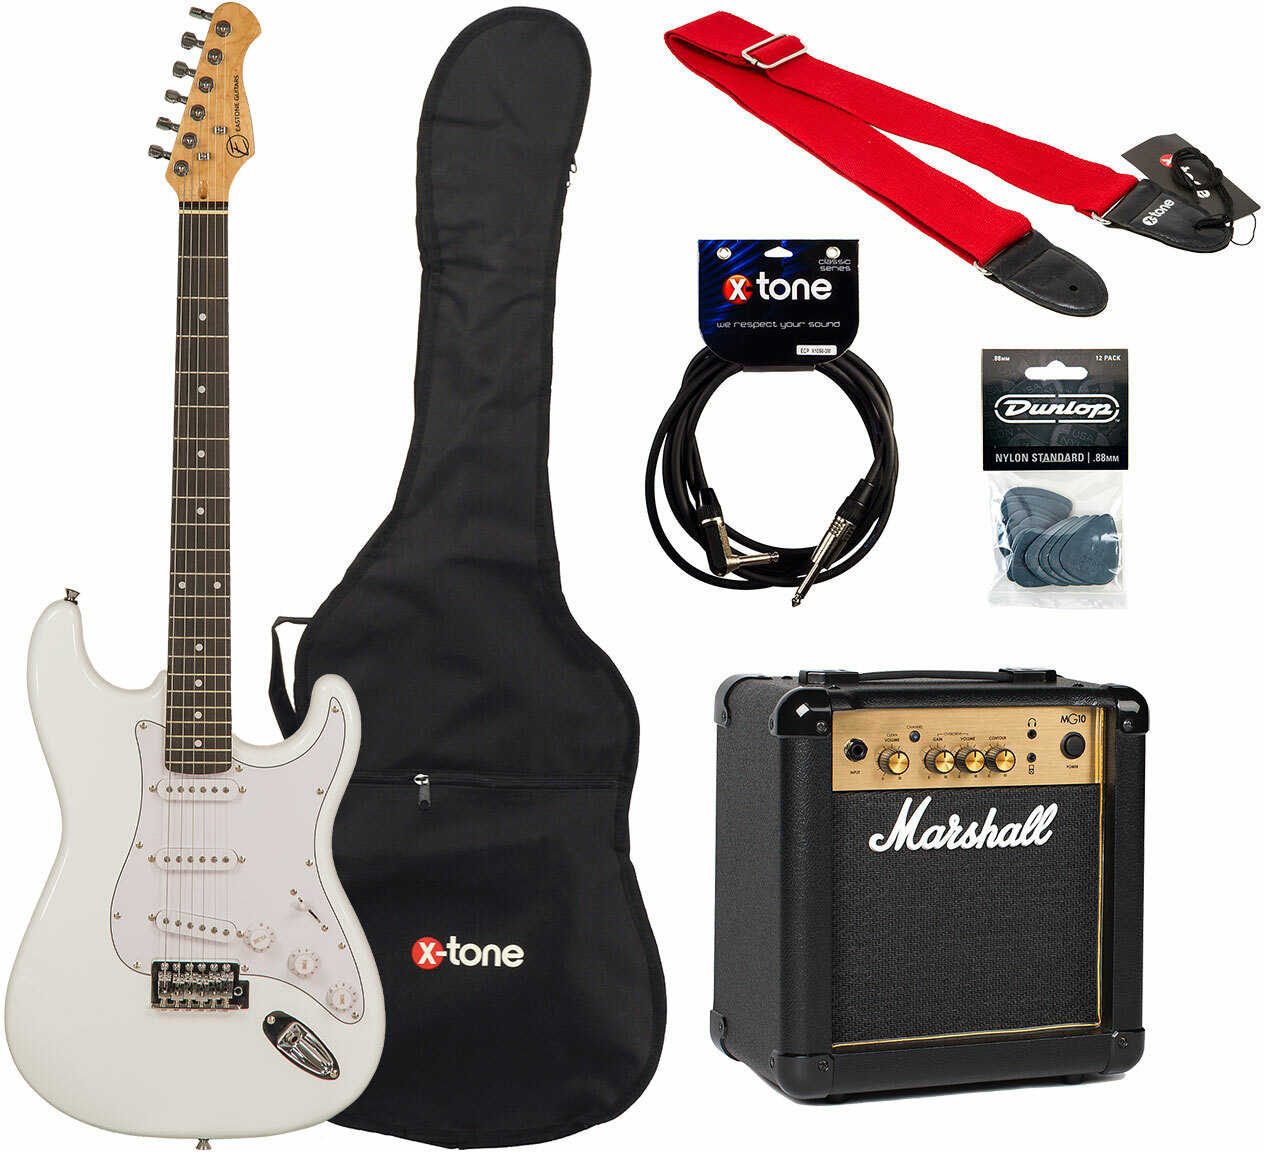 Eastone Str70 +marshall Mg10 10w +cable +mediators +housse - Olympic White - Packs guitarra eléctrica - Main picture